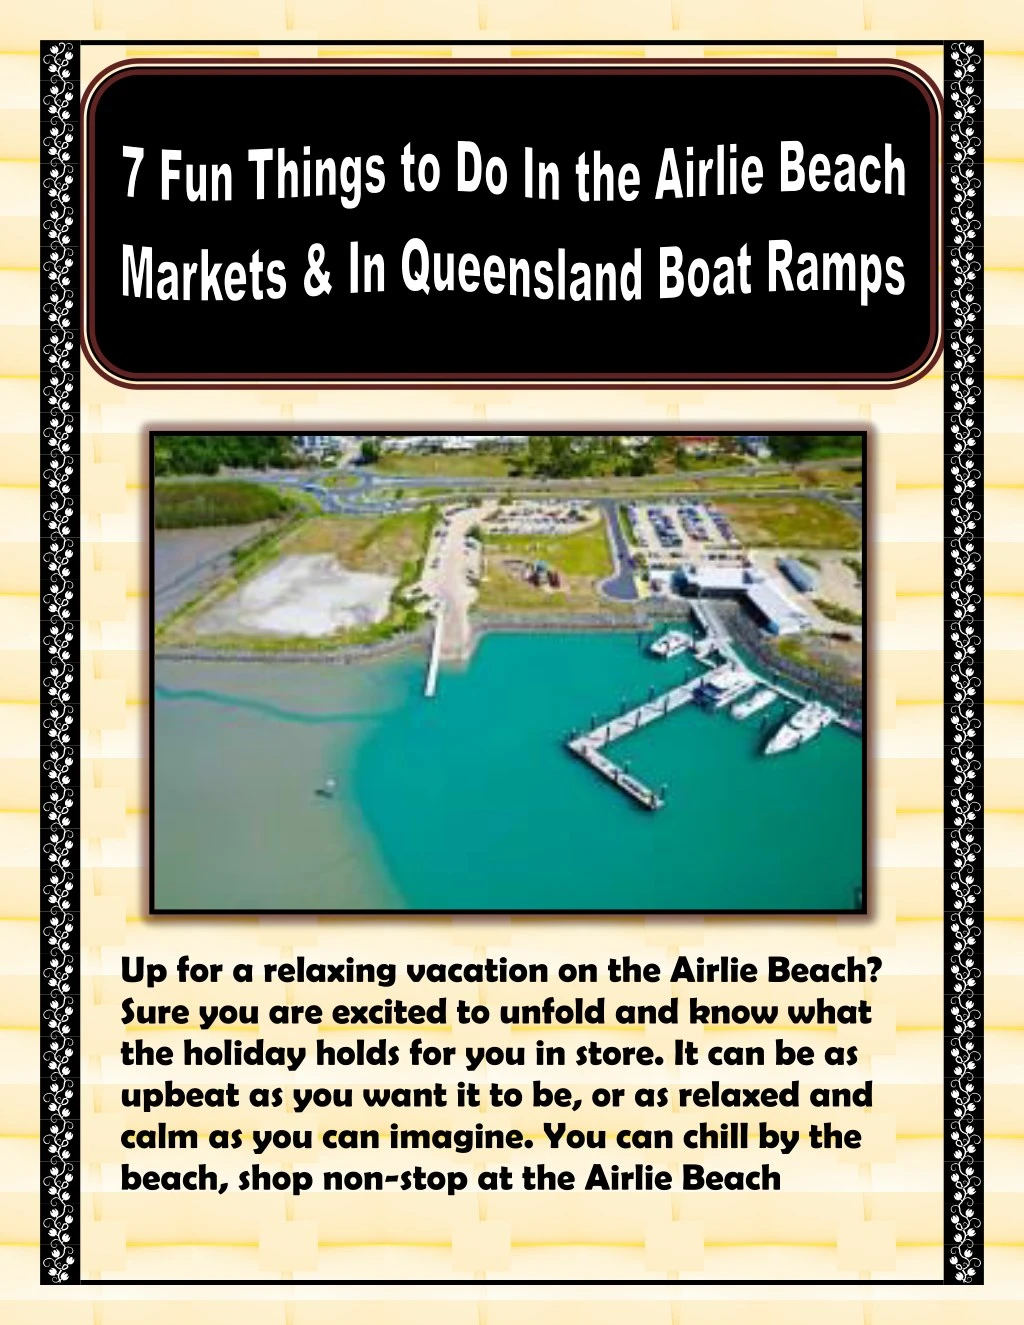 up for a relaxing vacation on the airlie beach